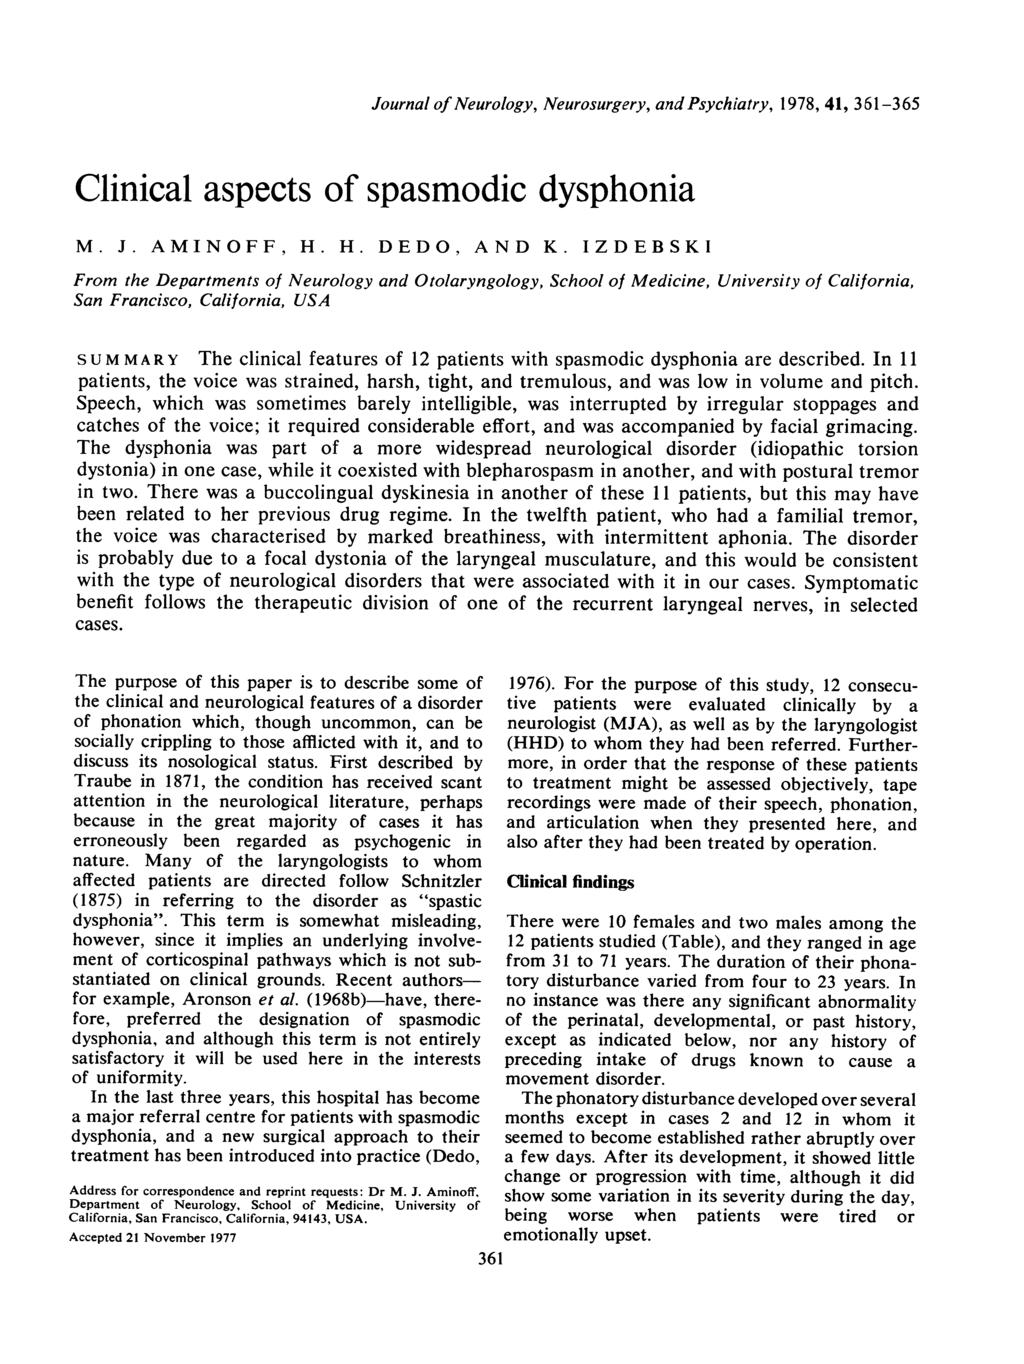 Journal of Neurology, Neurosurgery, and Psychiatry, 1978, 41, 361-365 Clinical aspects of spasmodic dysphonia M. J. AMINOFF, H. H. DEDO, AND K.